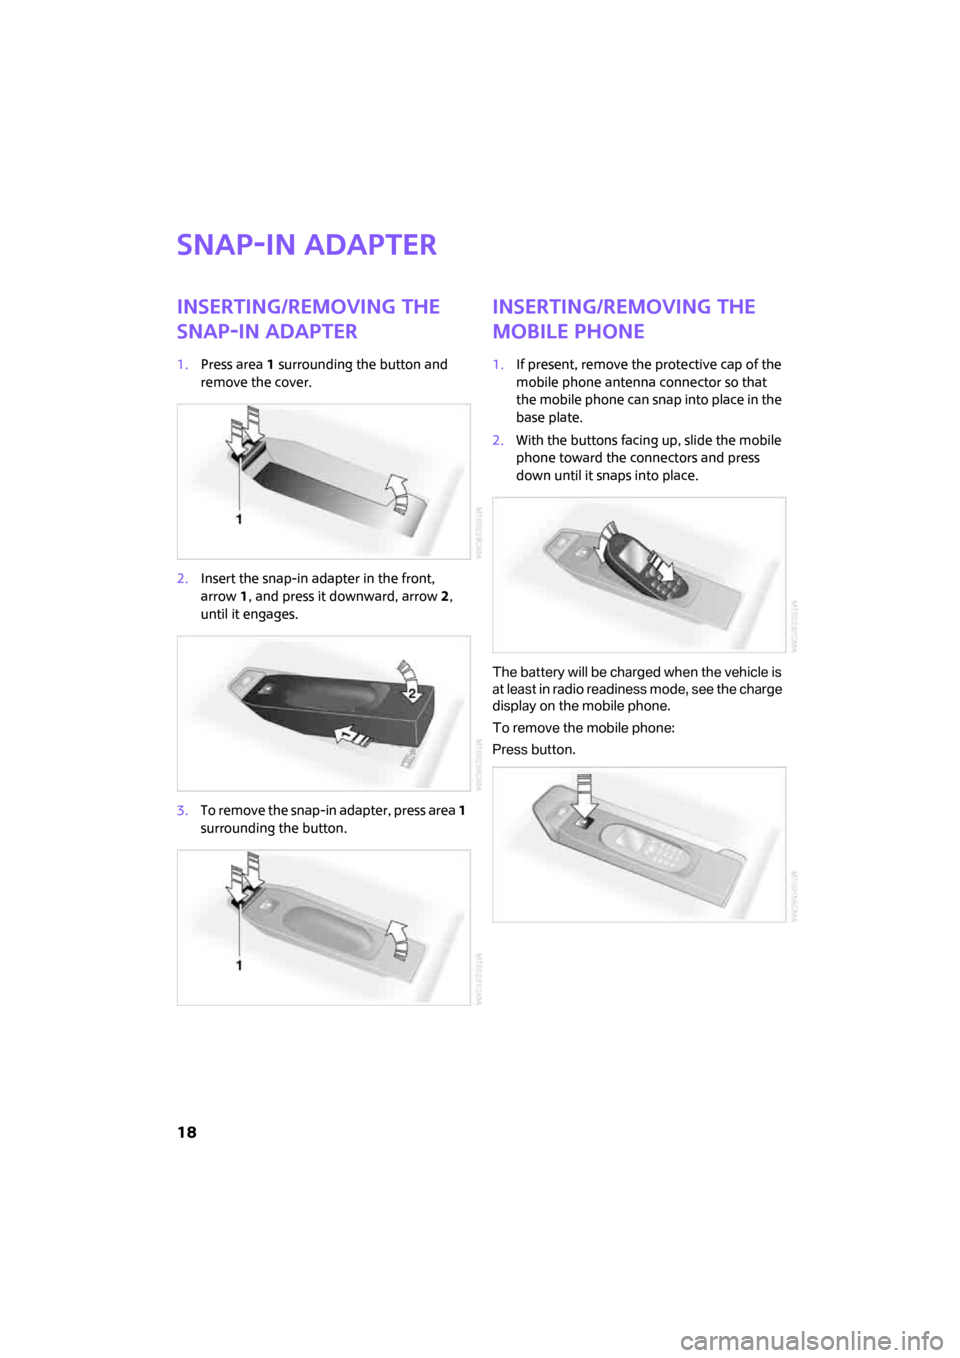 MINI Clubman 2008  Owners Manual (Mini Connected) 18
Snap-in adapter
Inserting/removing the 
snap-in adapter
1.Press area 1 surrounding the button and 
remove the cover.
2.Insert the snap-in adapter in the front, 
arrow1, and press it downward, arrow